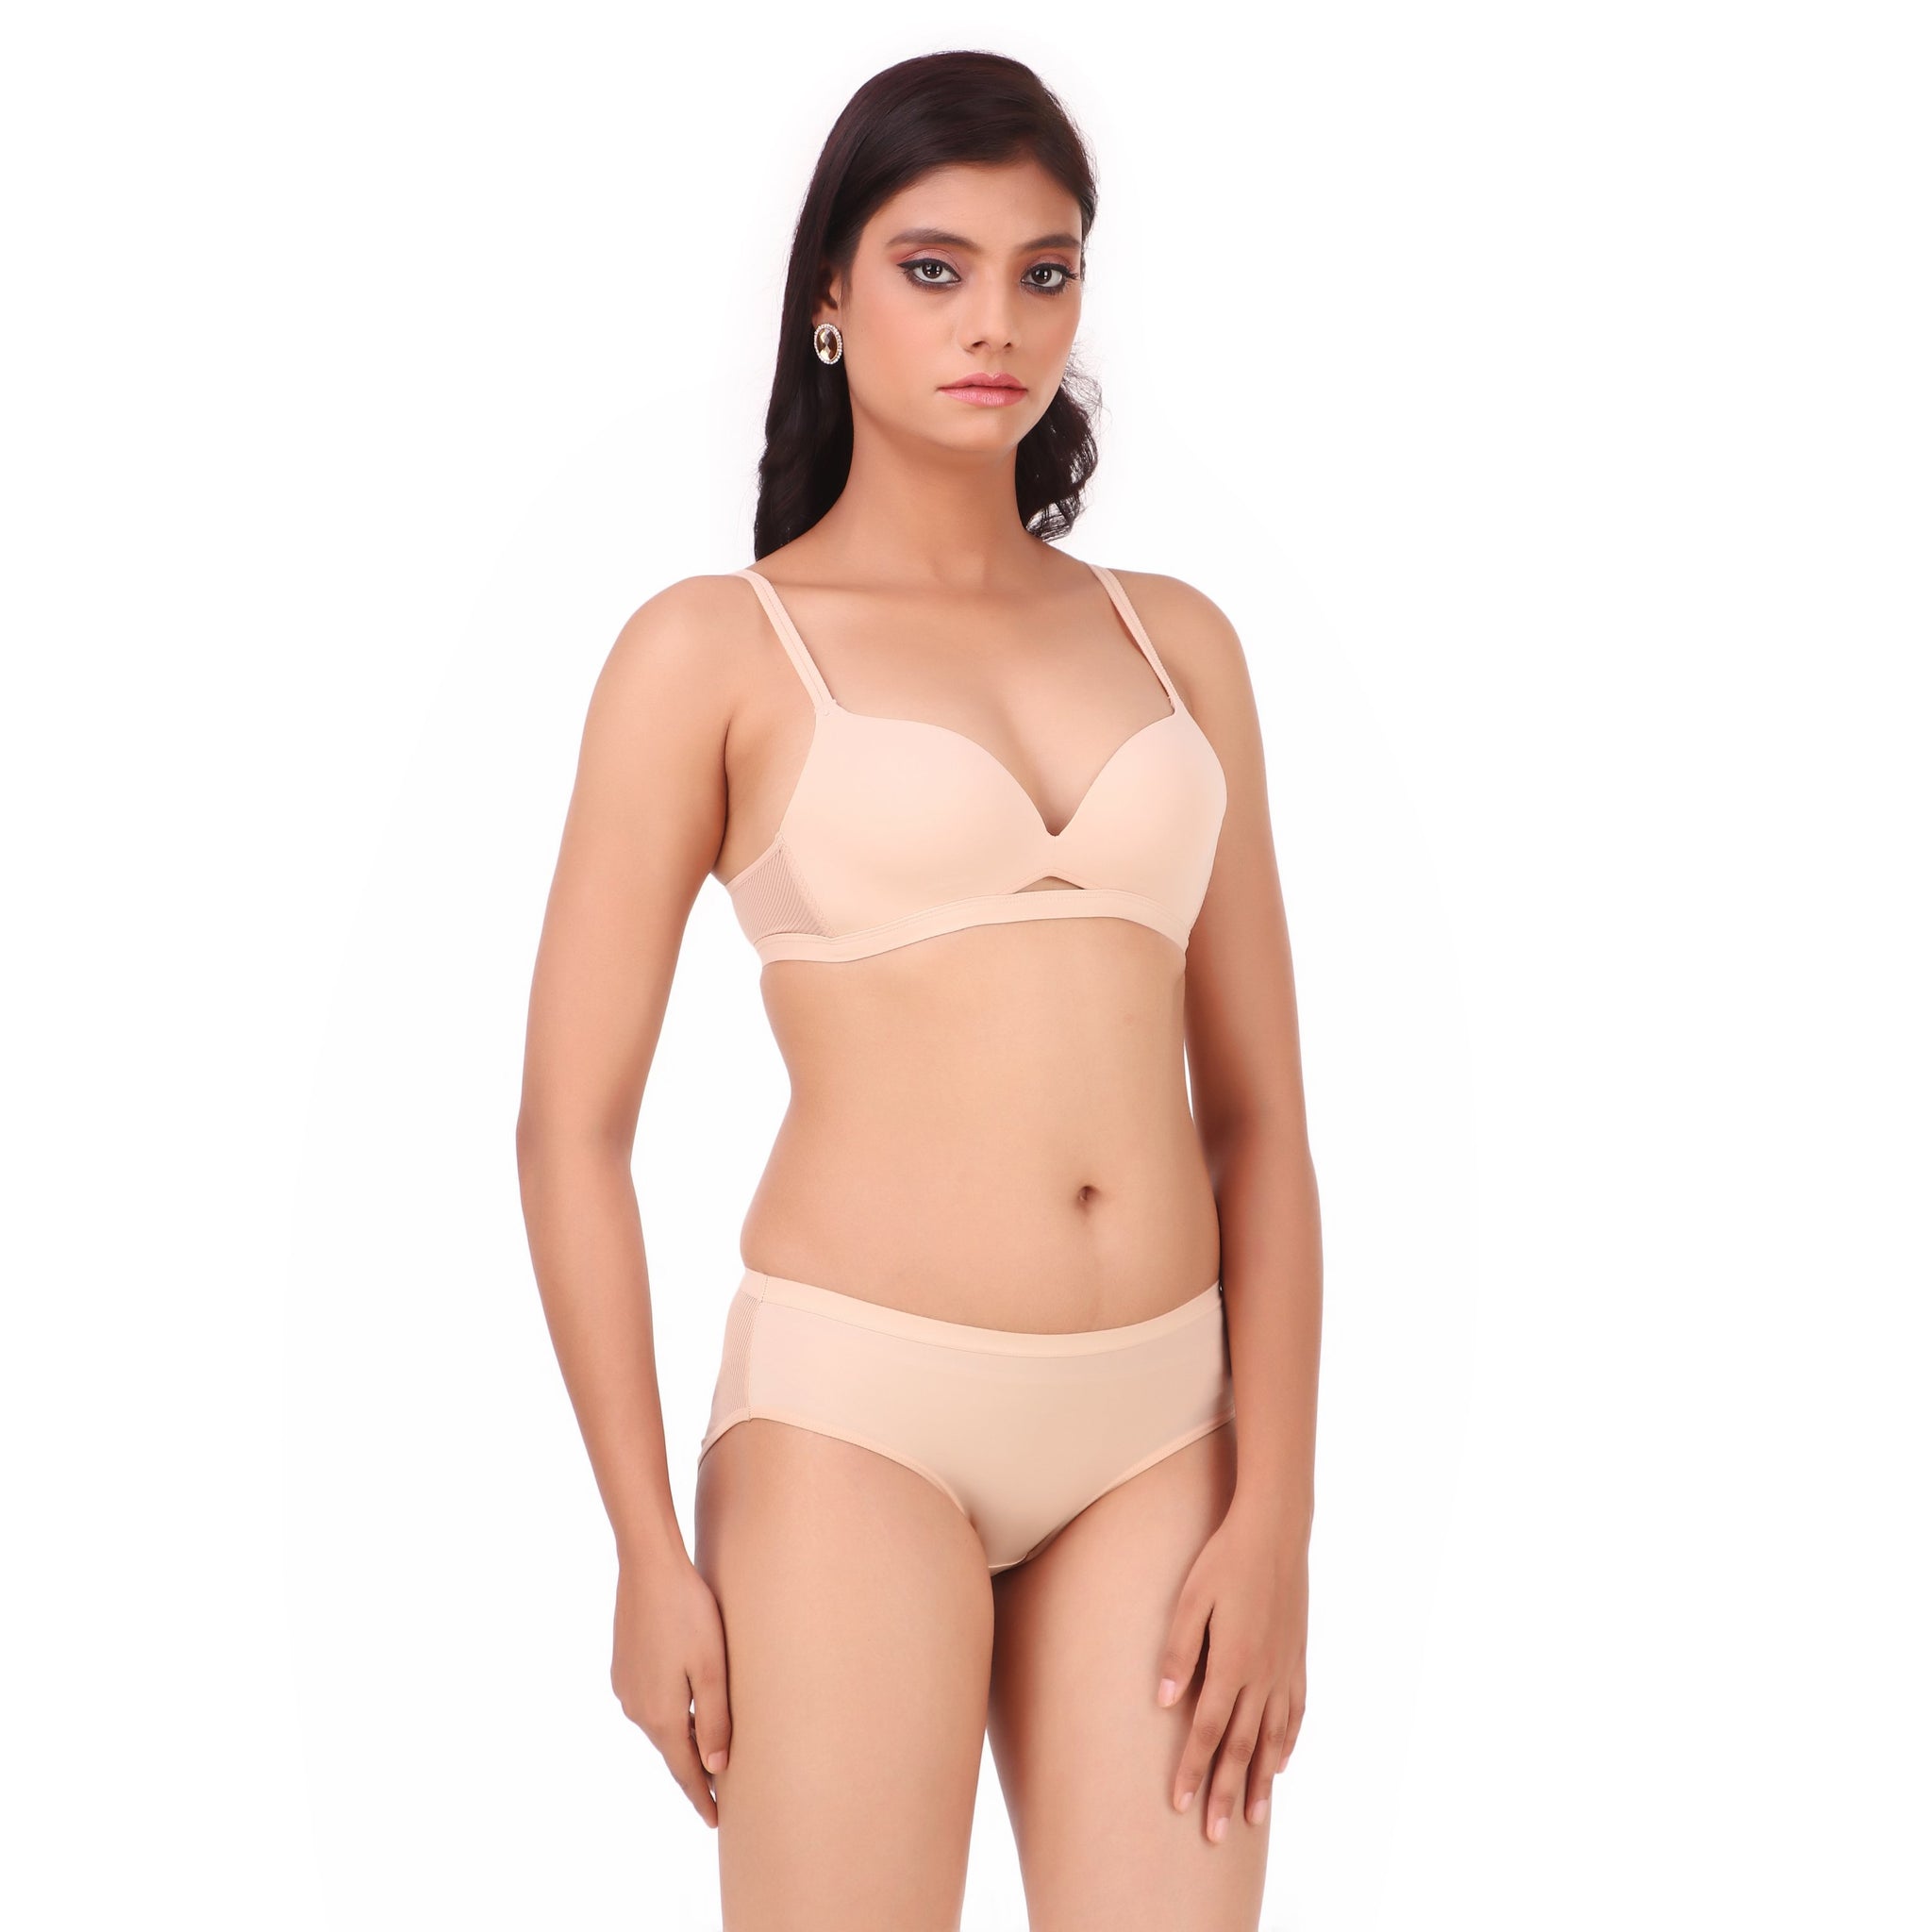 Peach Bra Panty Sets: Buy Peach Bra Panty Sets for Women Online at Low  Prices - Snapdeal India